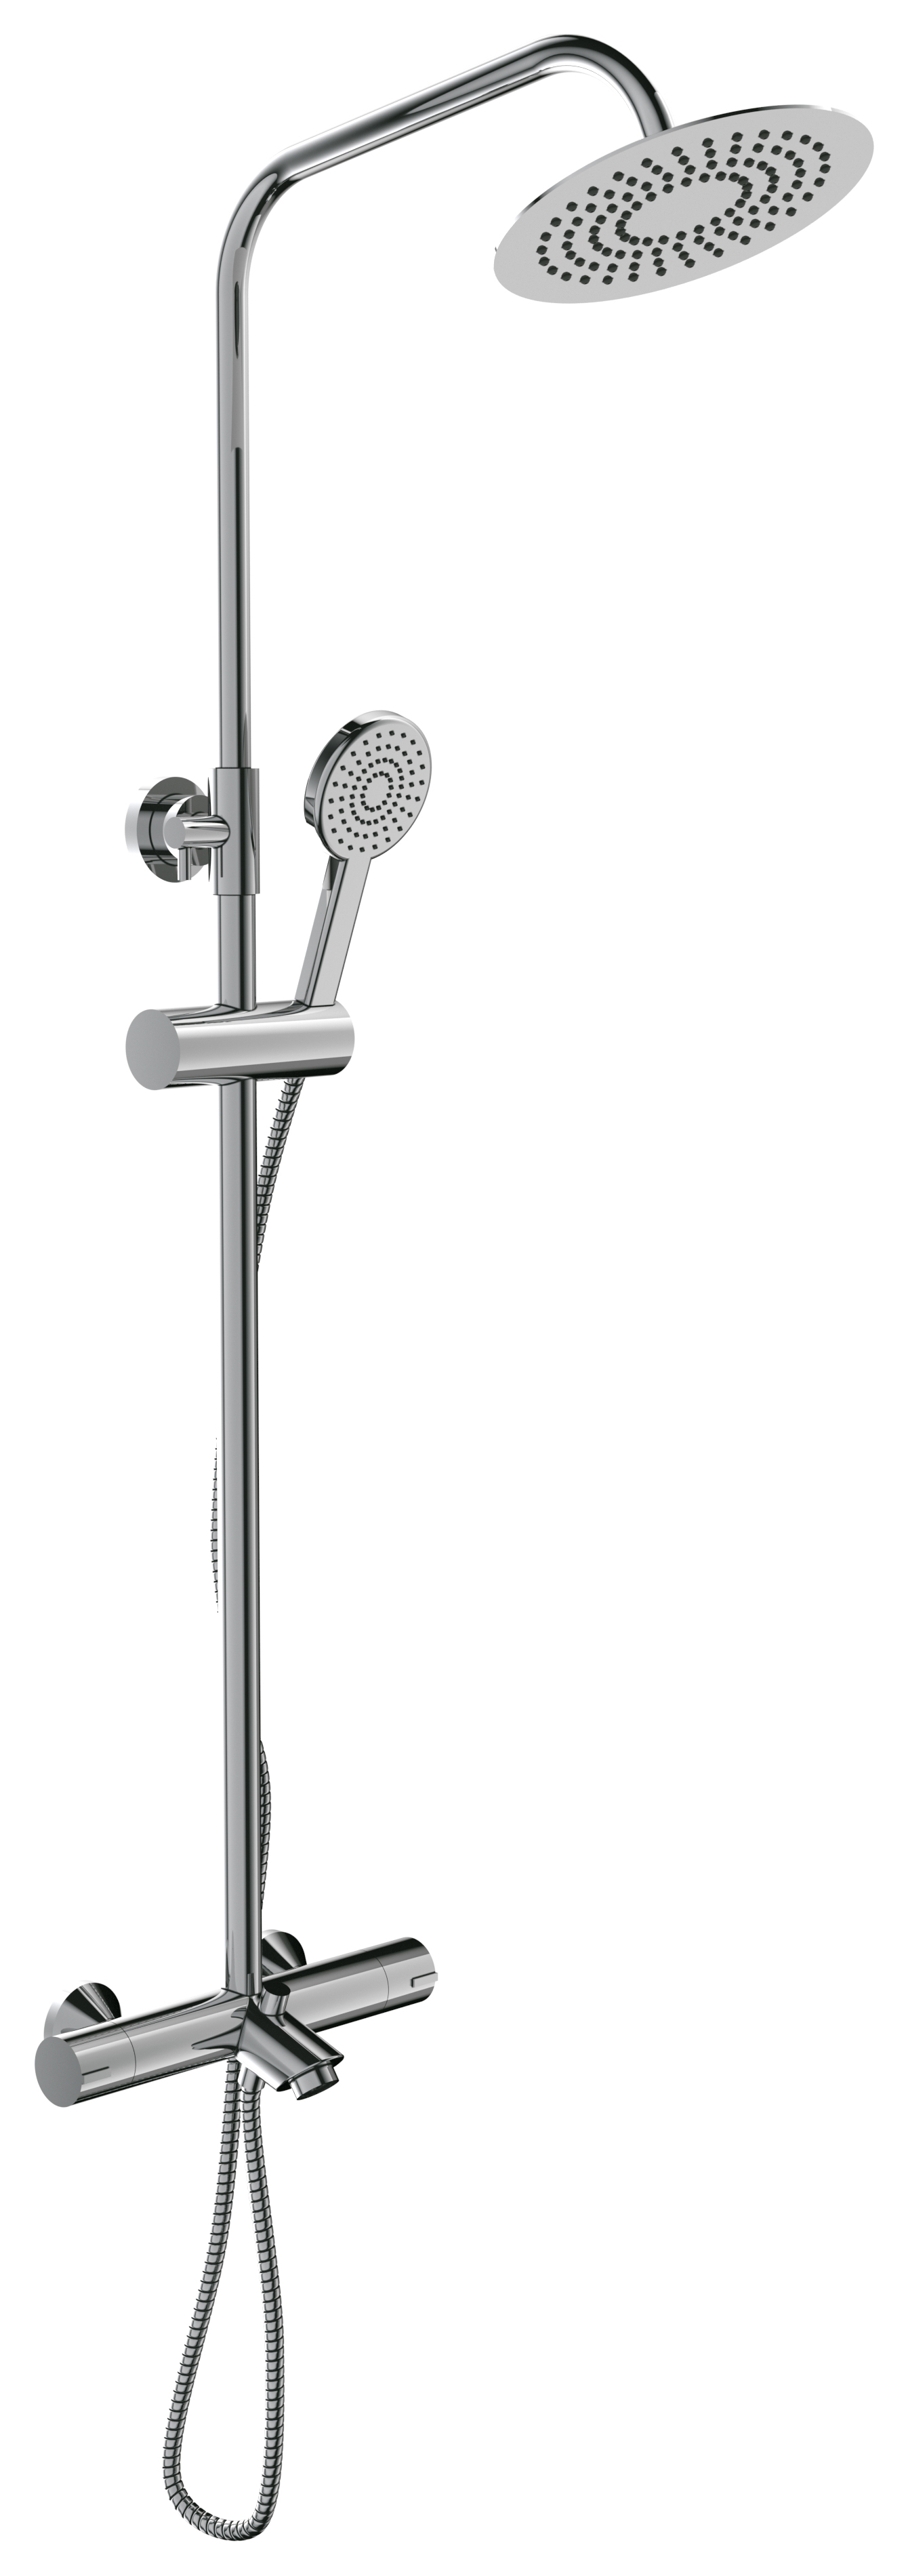 Image of Hadleigh Wall Mounted Dual Outlet Bath Shower Mixer - Chrome